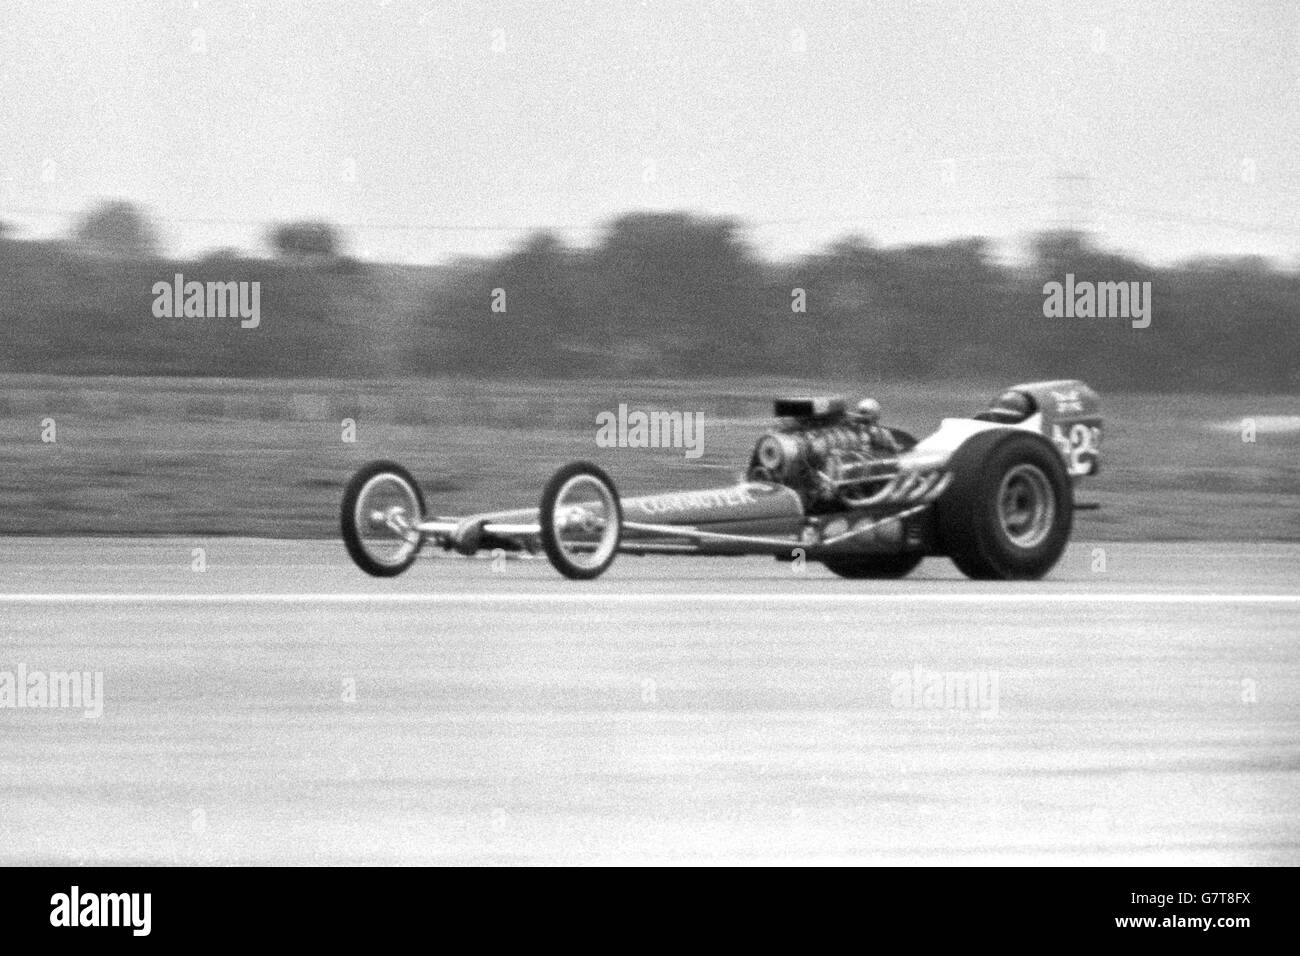 Record breaker, Tony Densham, 40, in his dragster 'Commuter', in which he created a new British Land speed record of 211 plus mph on the Royal Air Force, Elvington, Yorkshire, airfield. Stock Photo